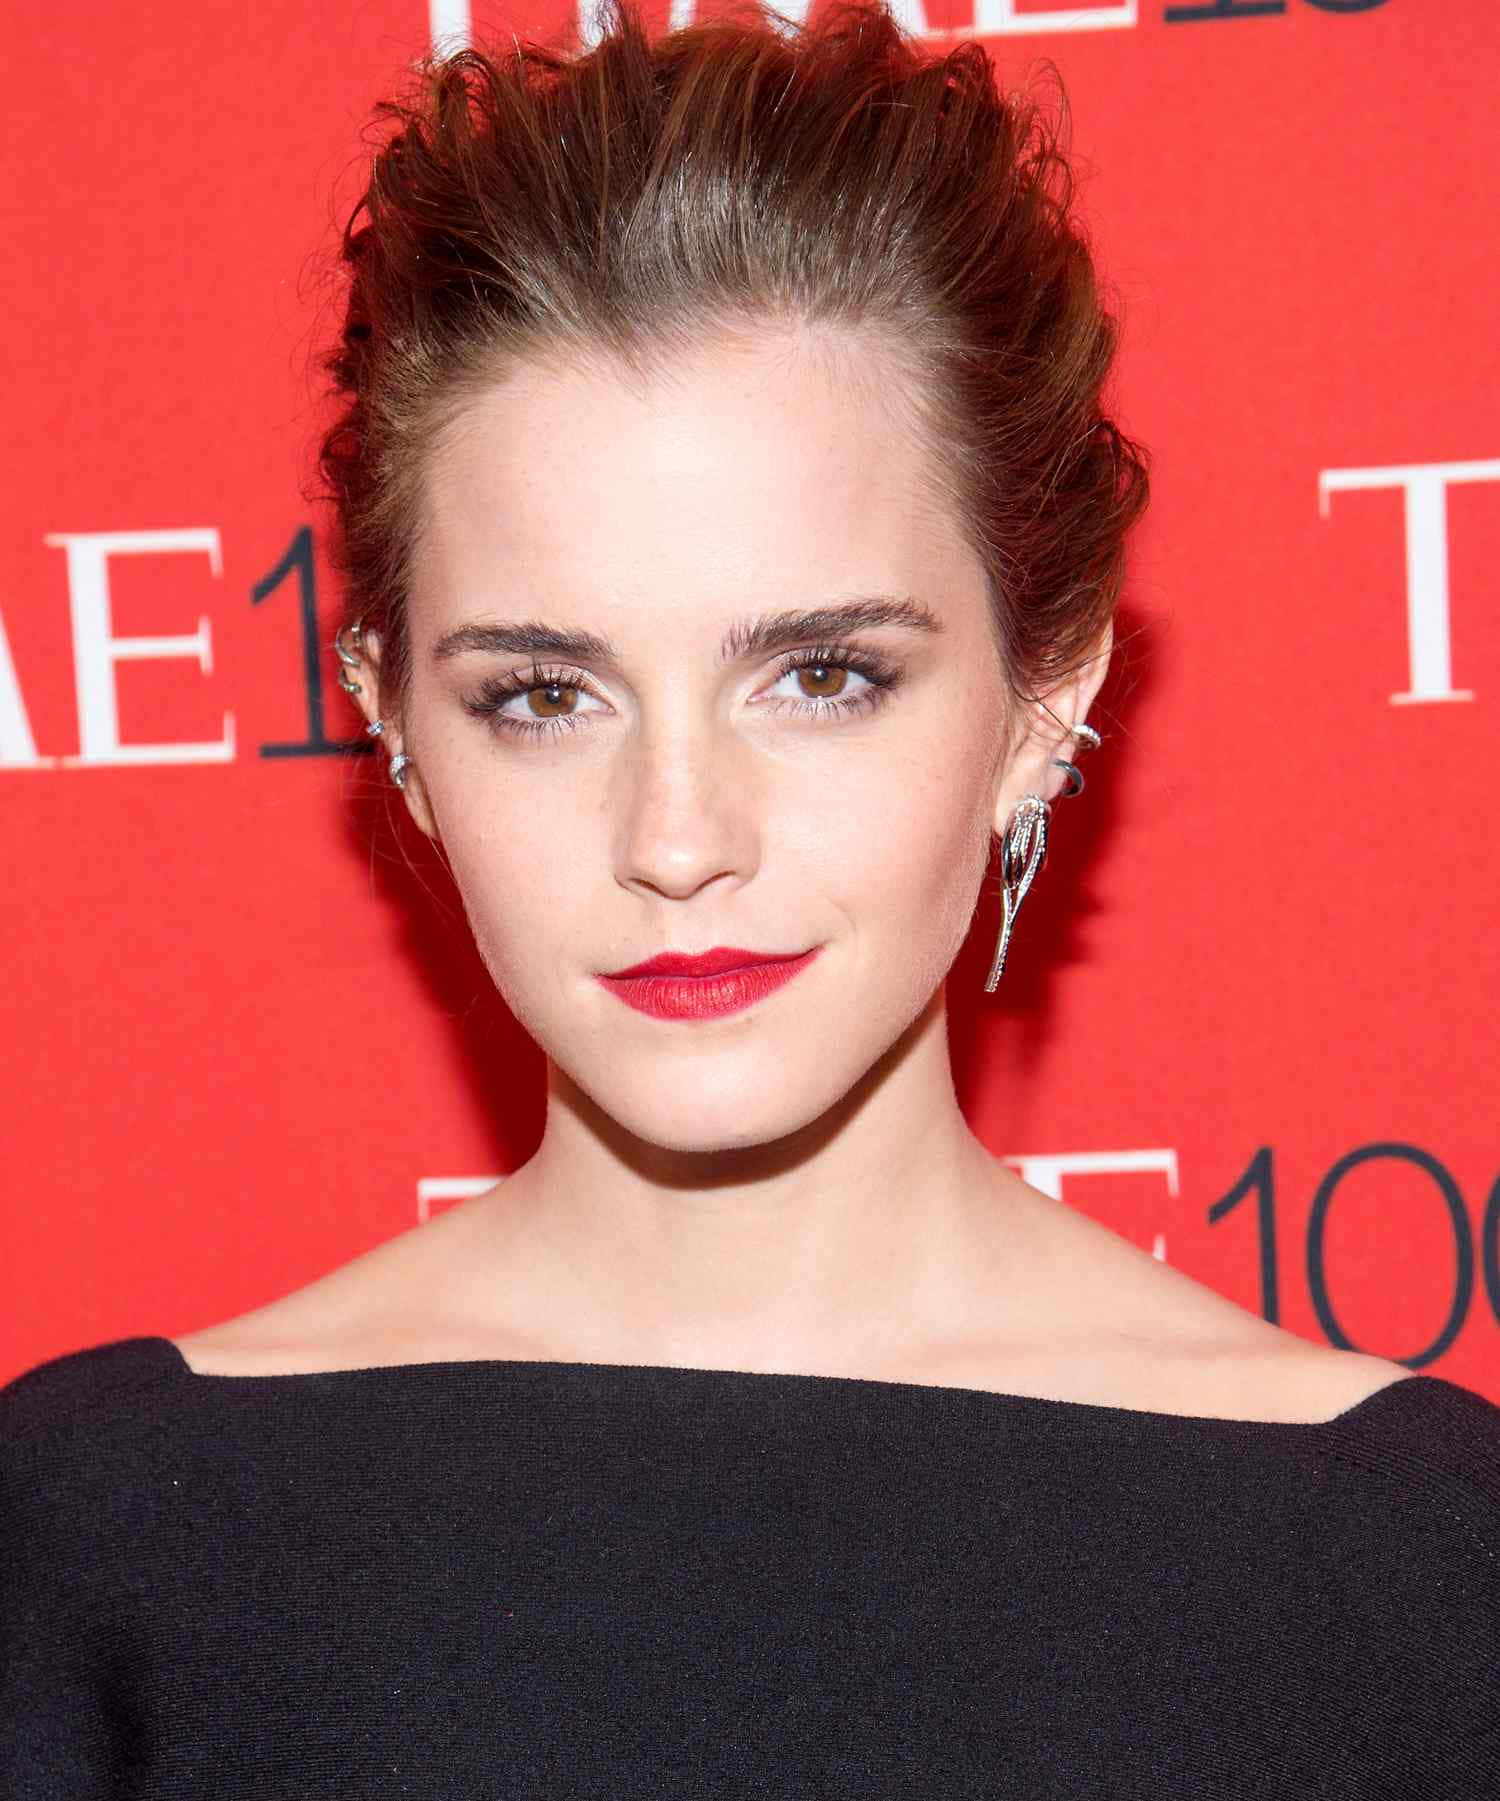 Emma Watson looking confident and beautiful